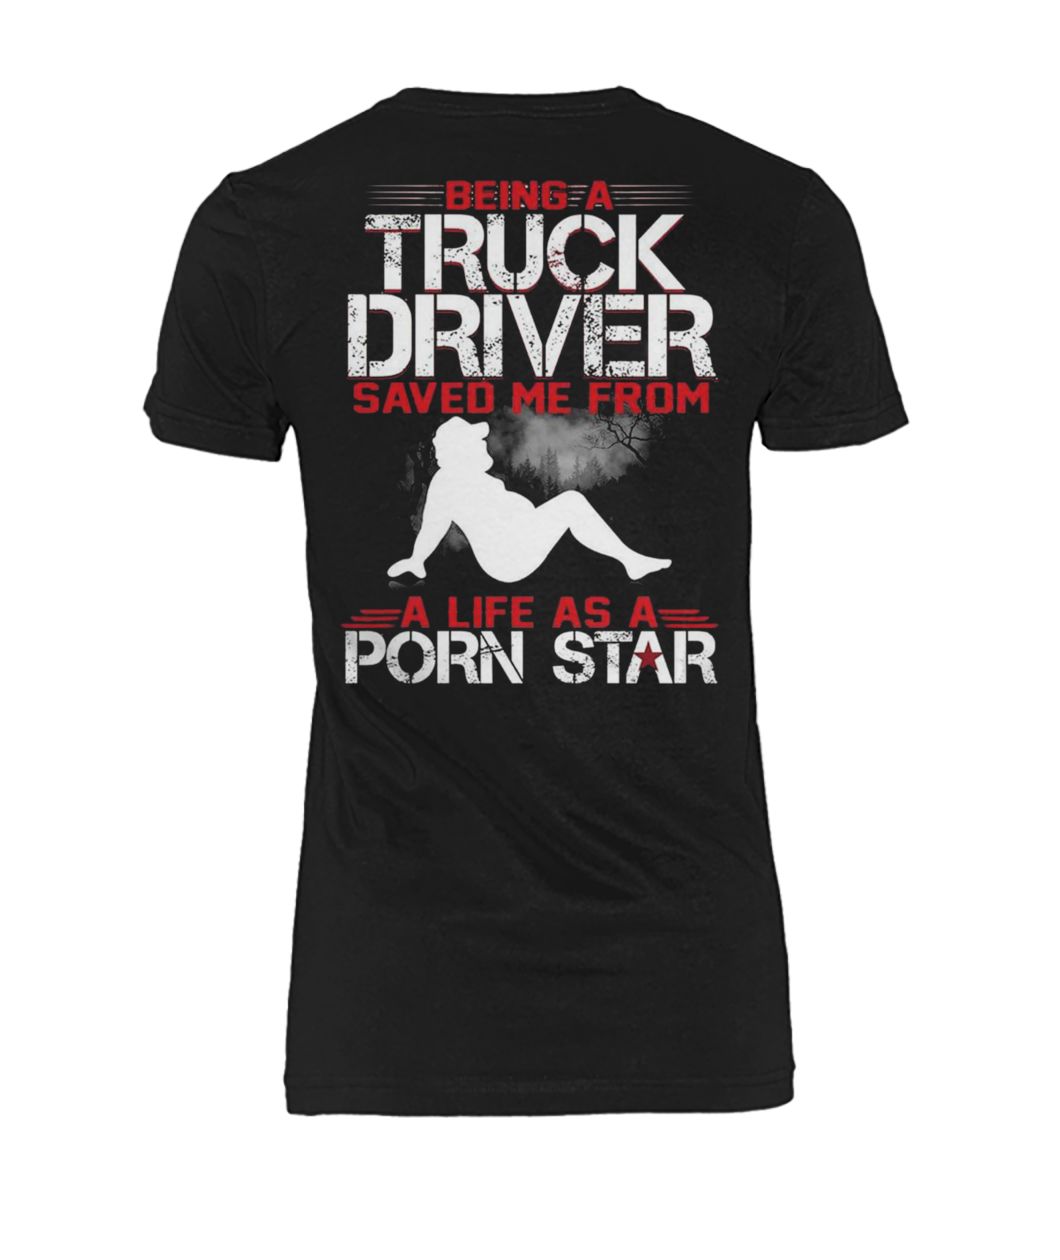 Being a truck driver save me from a life as a porn star women's crew tee